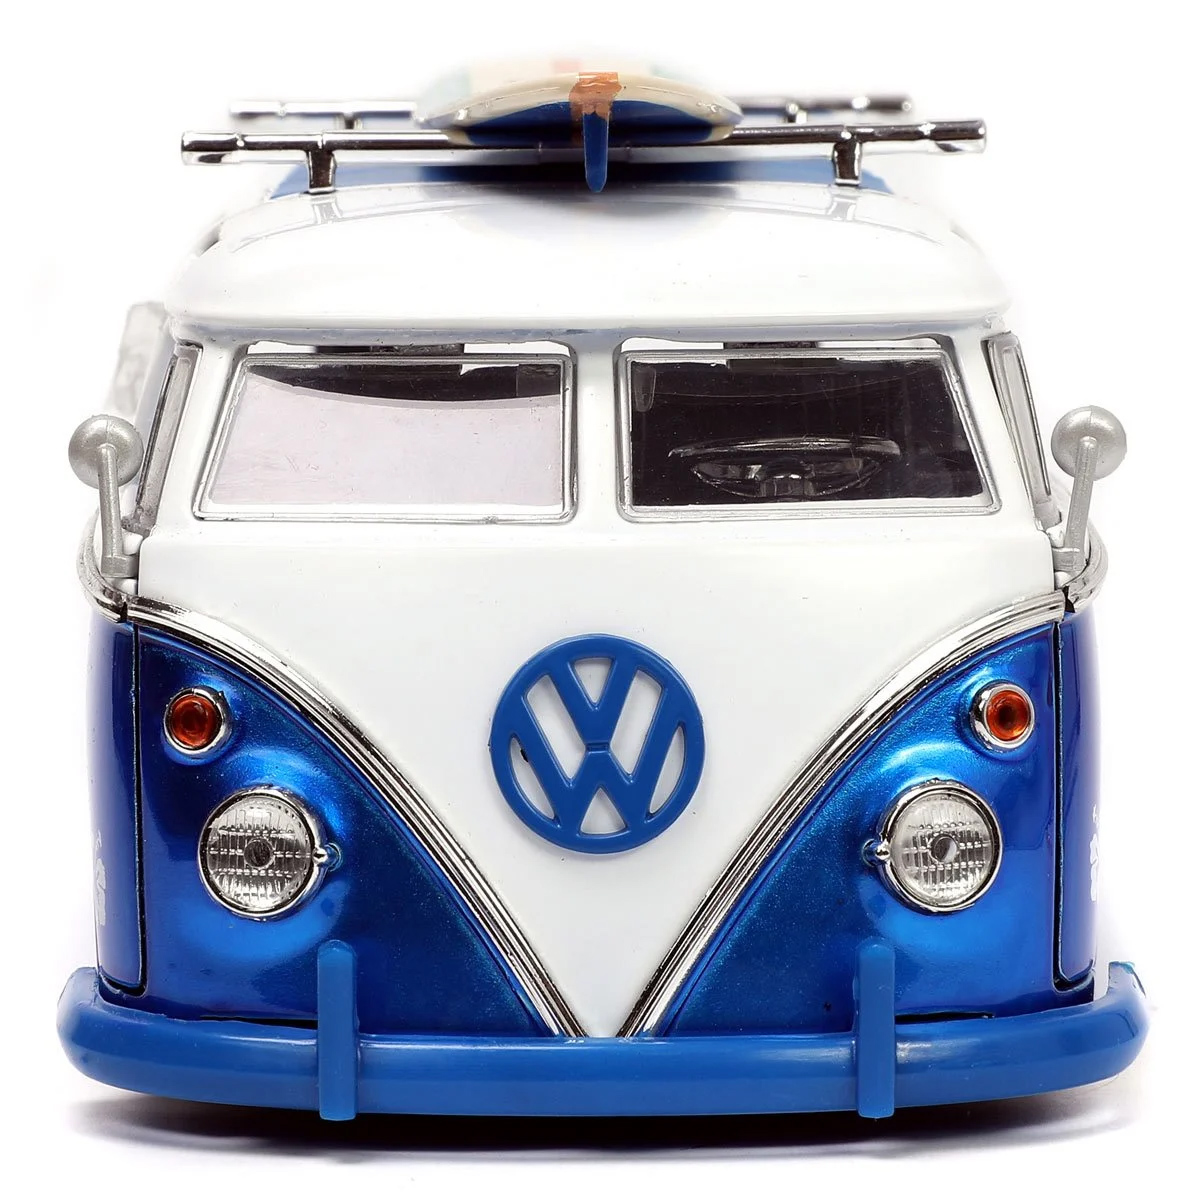 Kombi Lilo and Stitch VW Bus 1-24 Scale Die-Cast Metal Vehicle with Figure